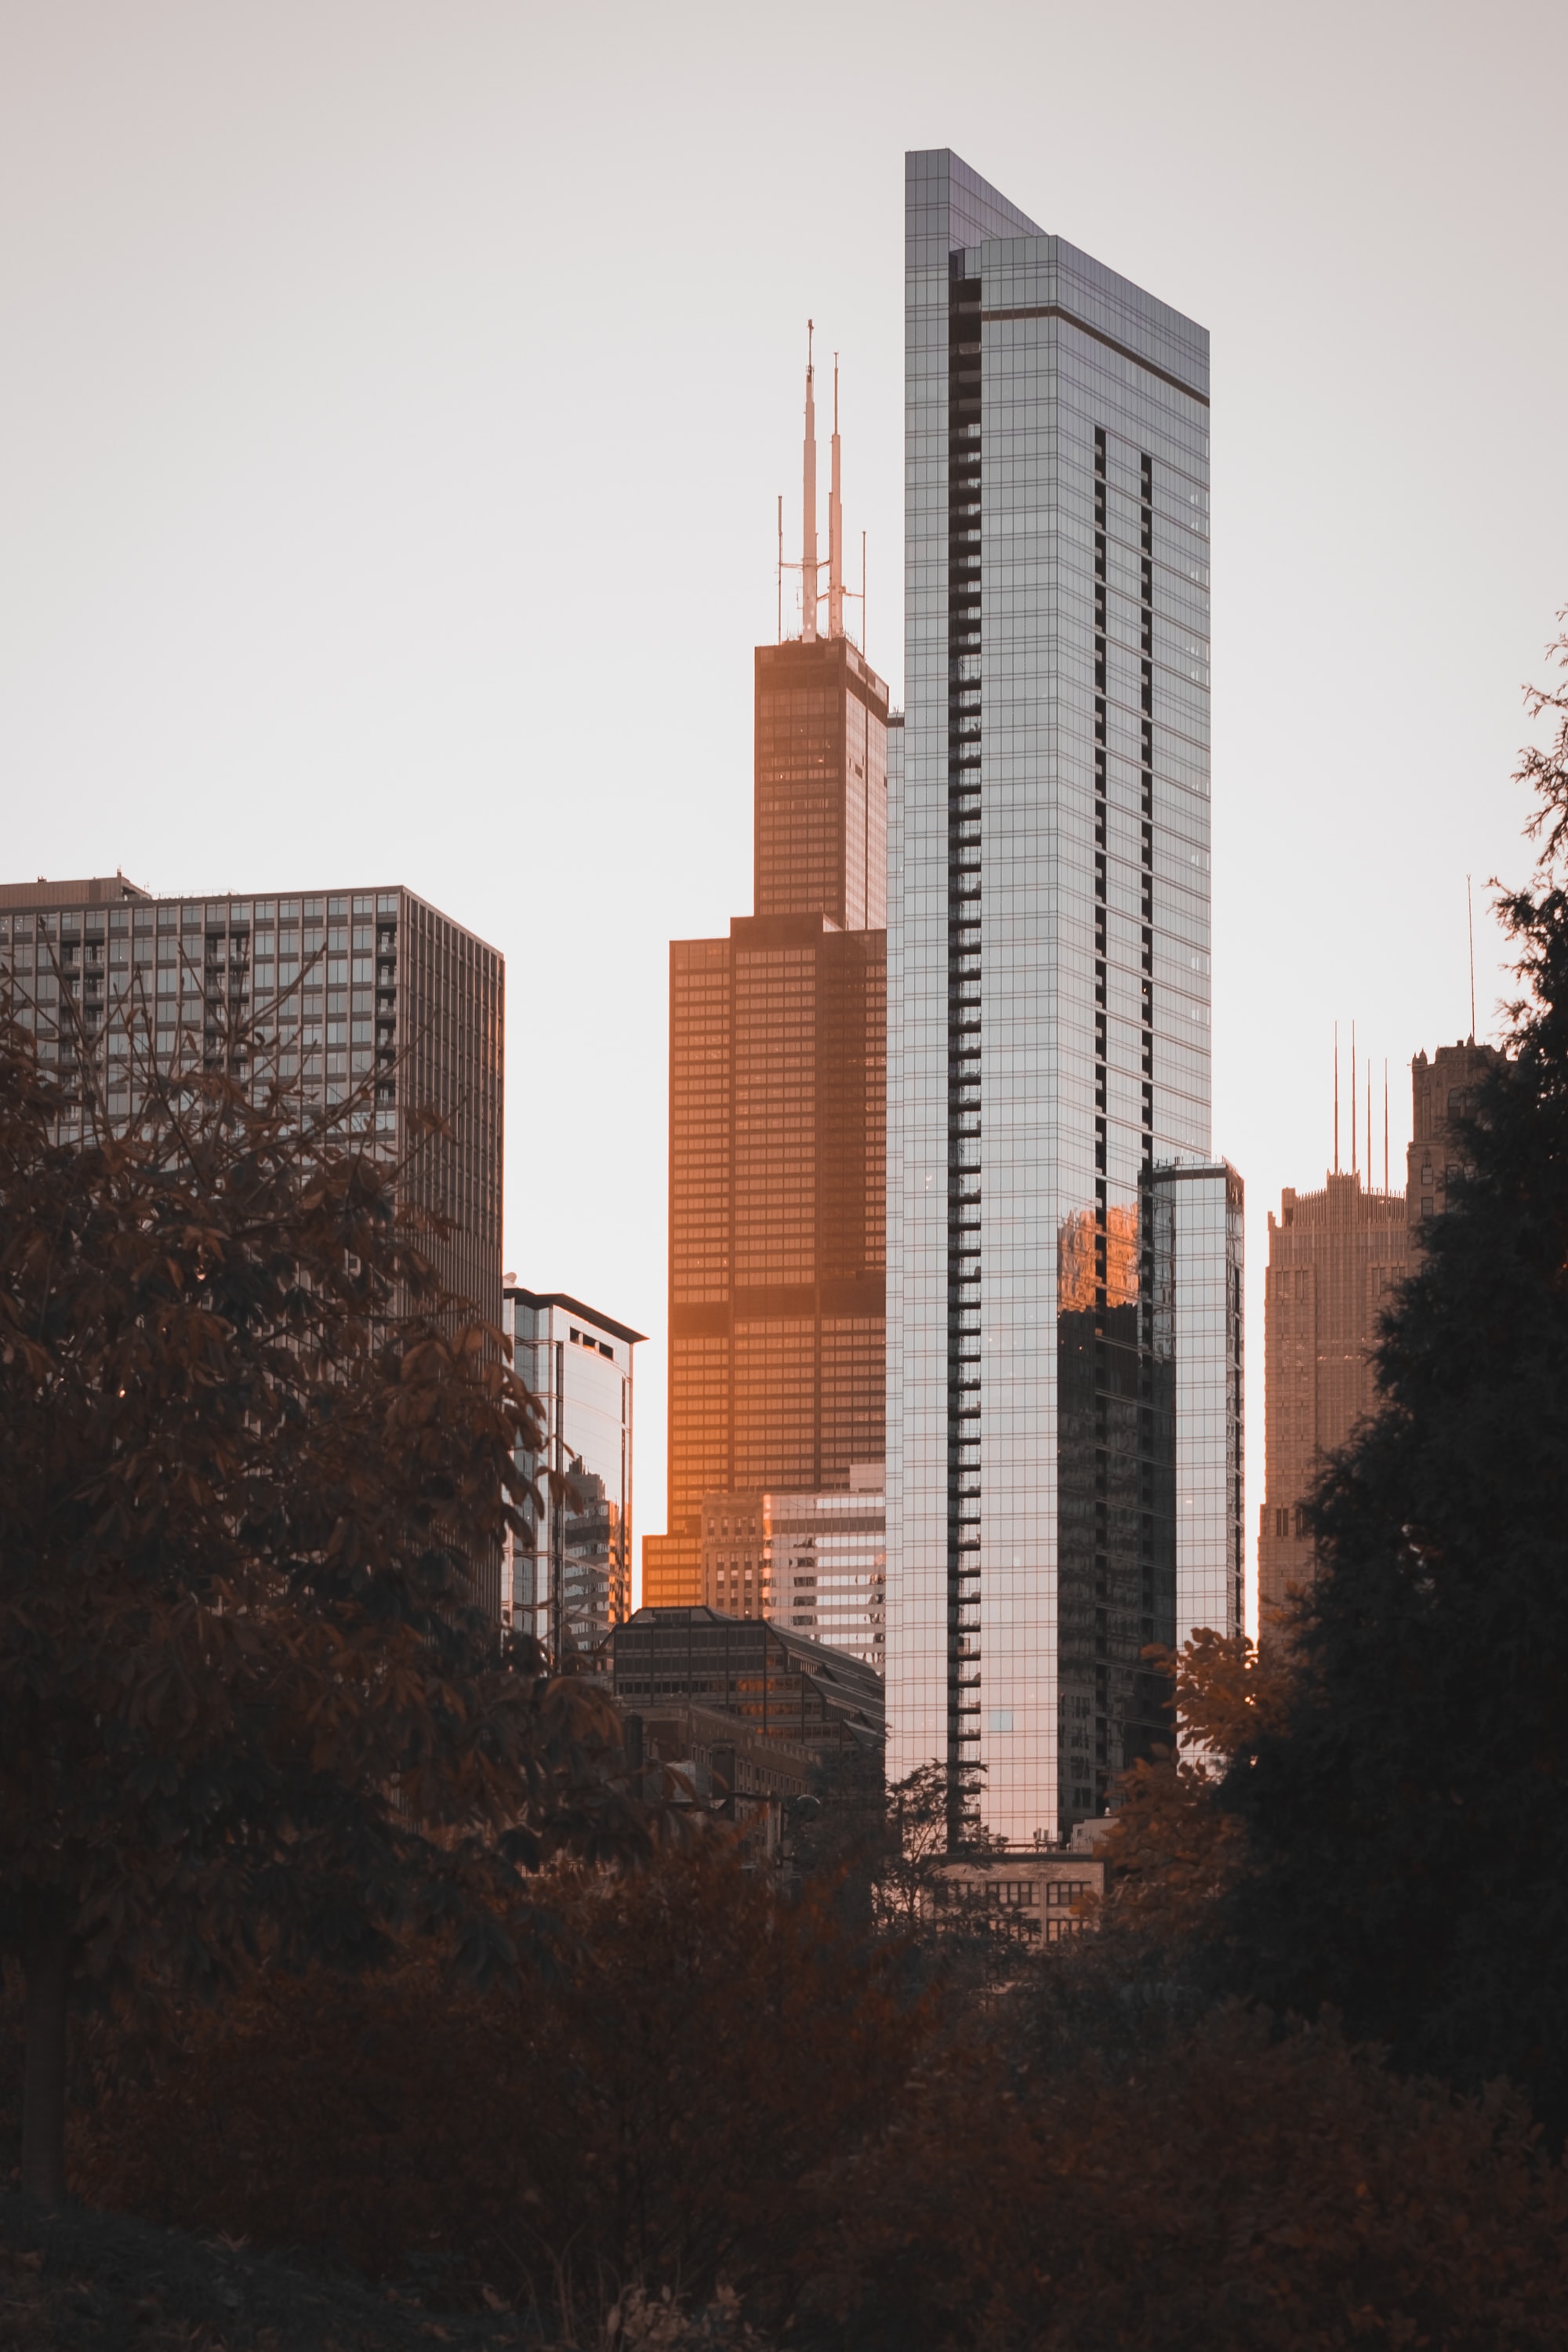 Popular Skyscrapers Image for Phone